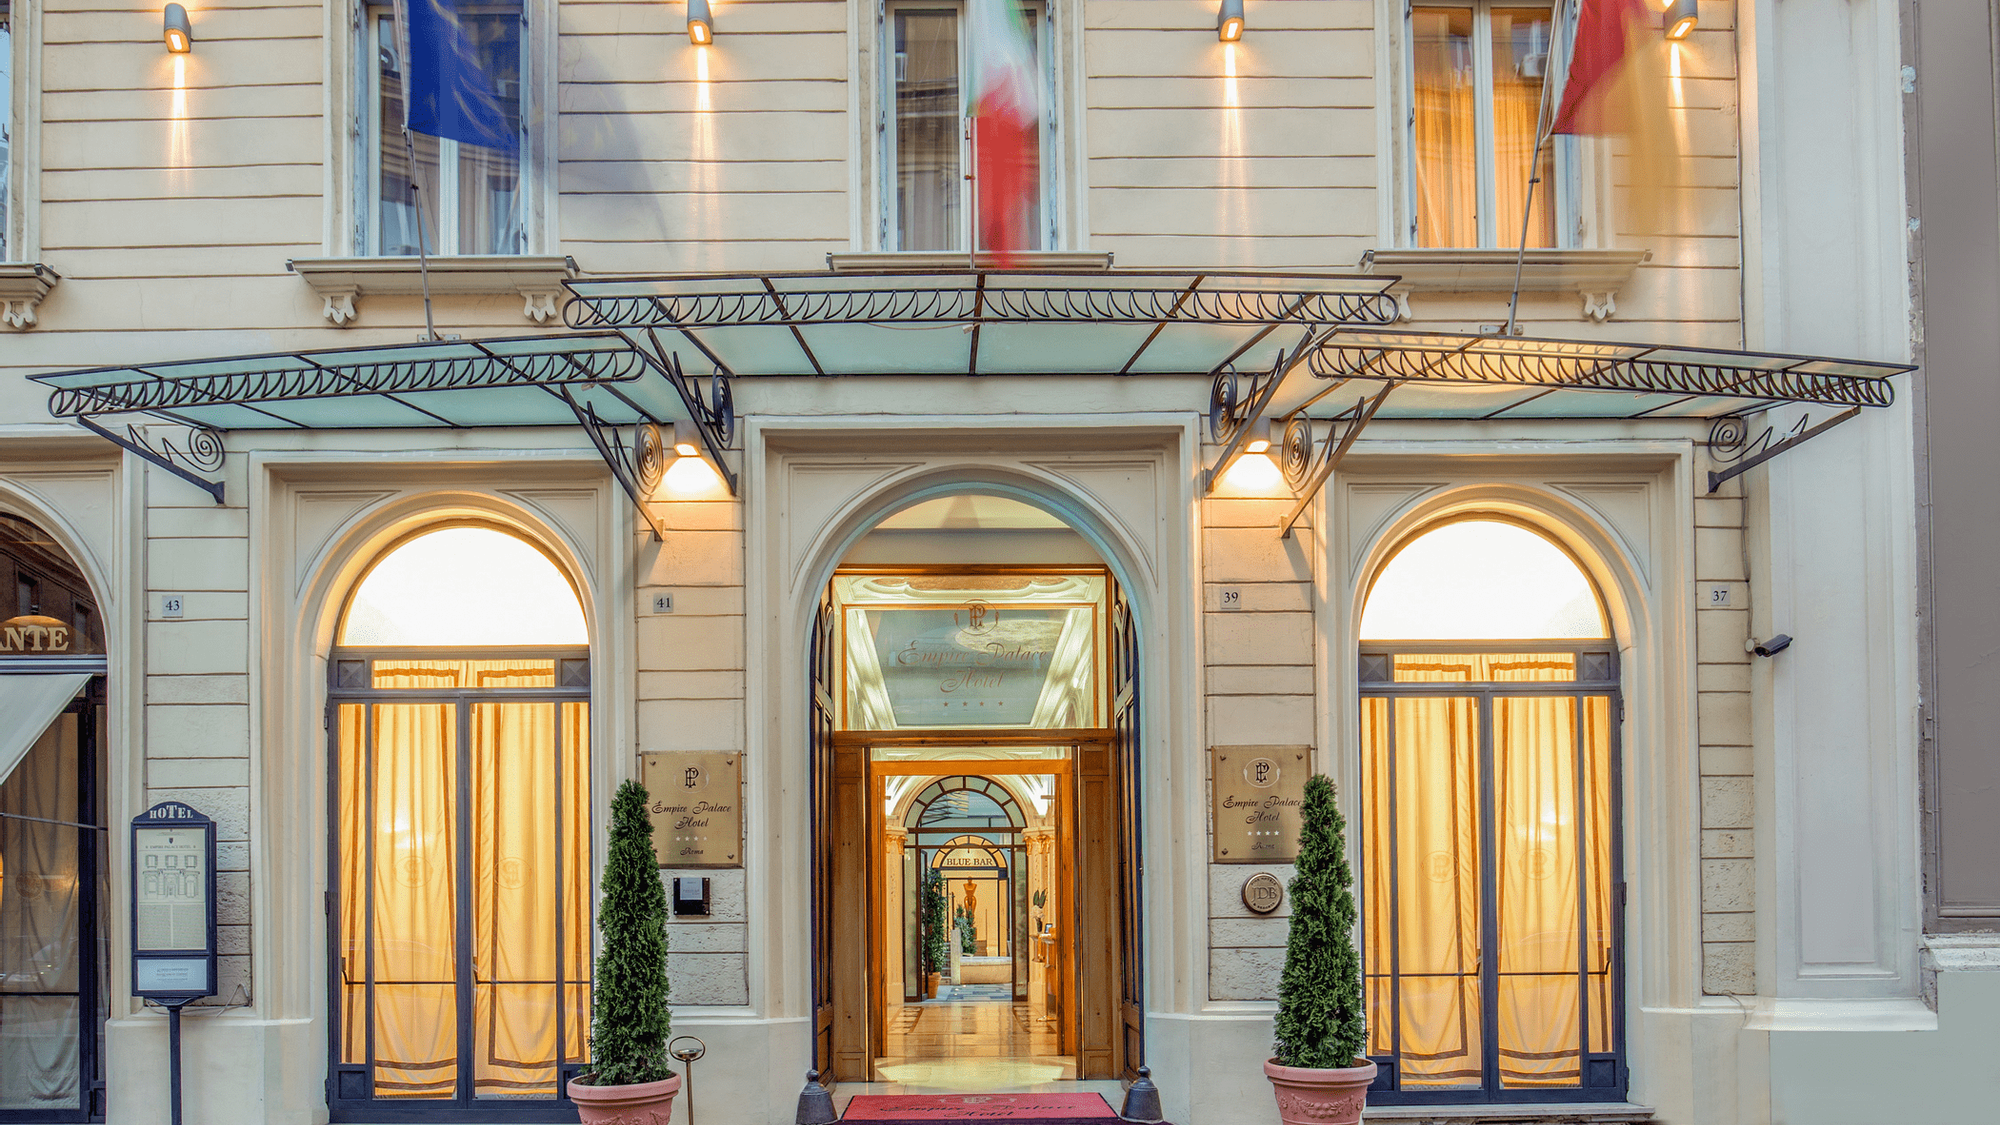 Welcome to UNAWAY Hotel Empire Roma